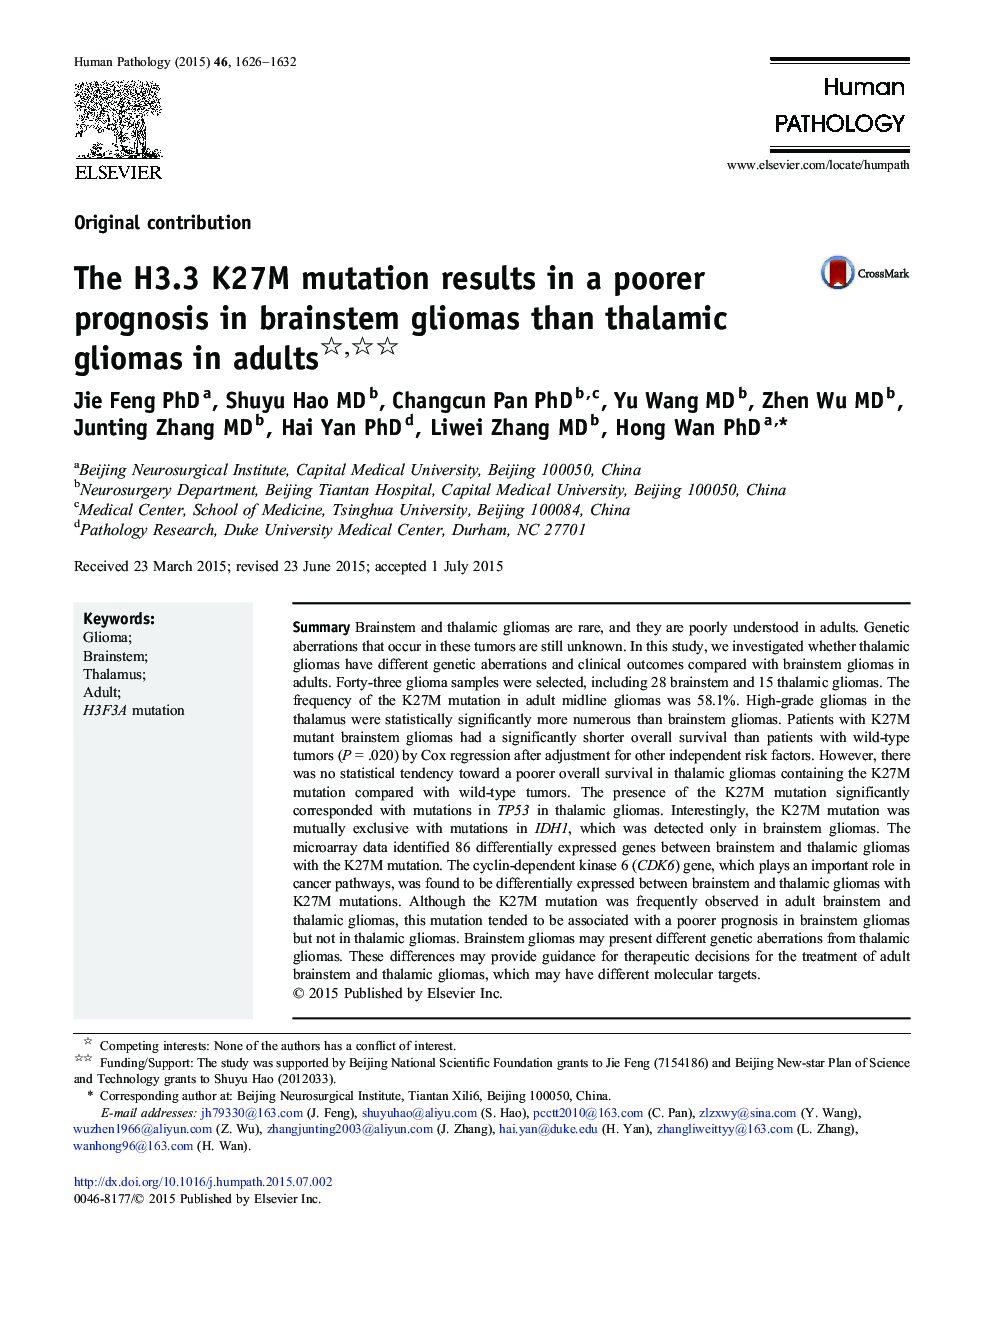 The H3.3 K27M mutation results in a poorer prognosis in brainstem gliomas than thalamic gliomas in adults 